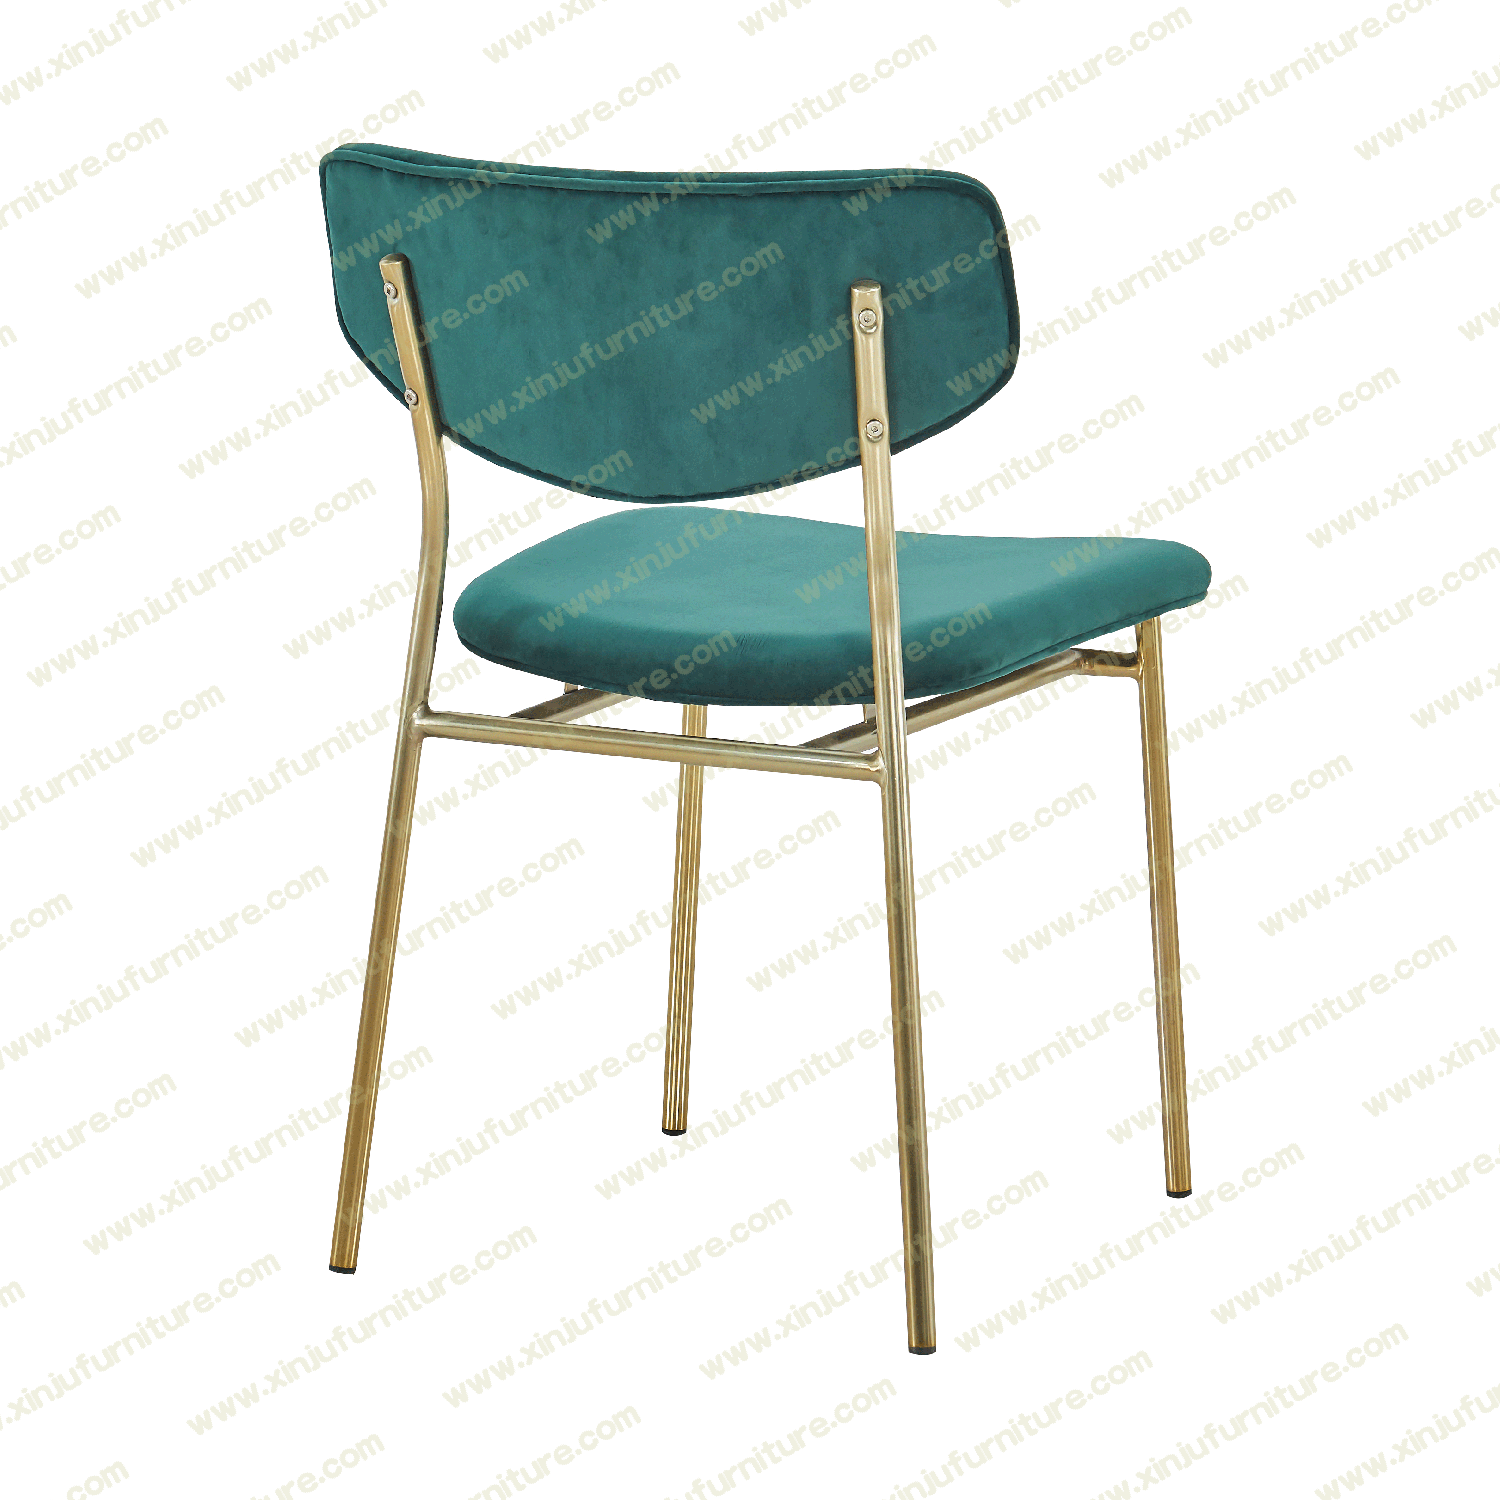 Simple and comfortable dining chair without armrest